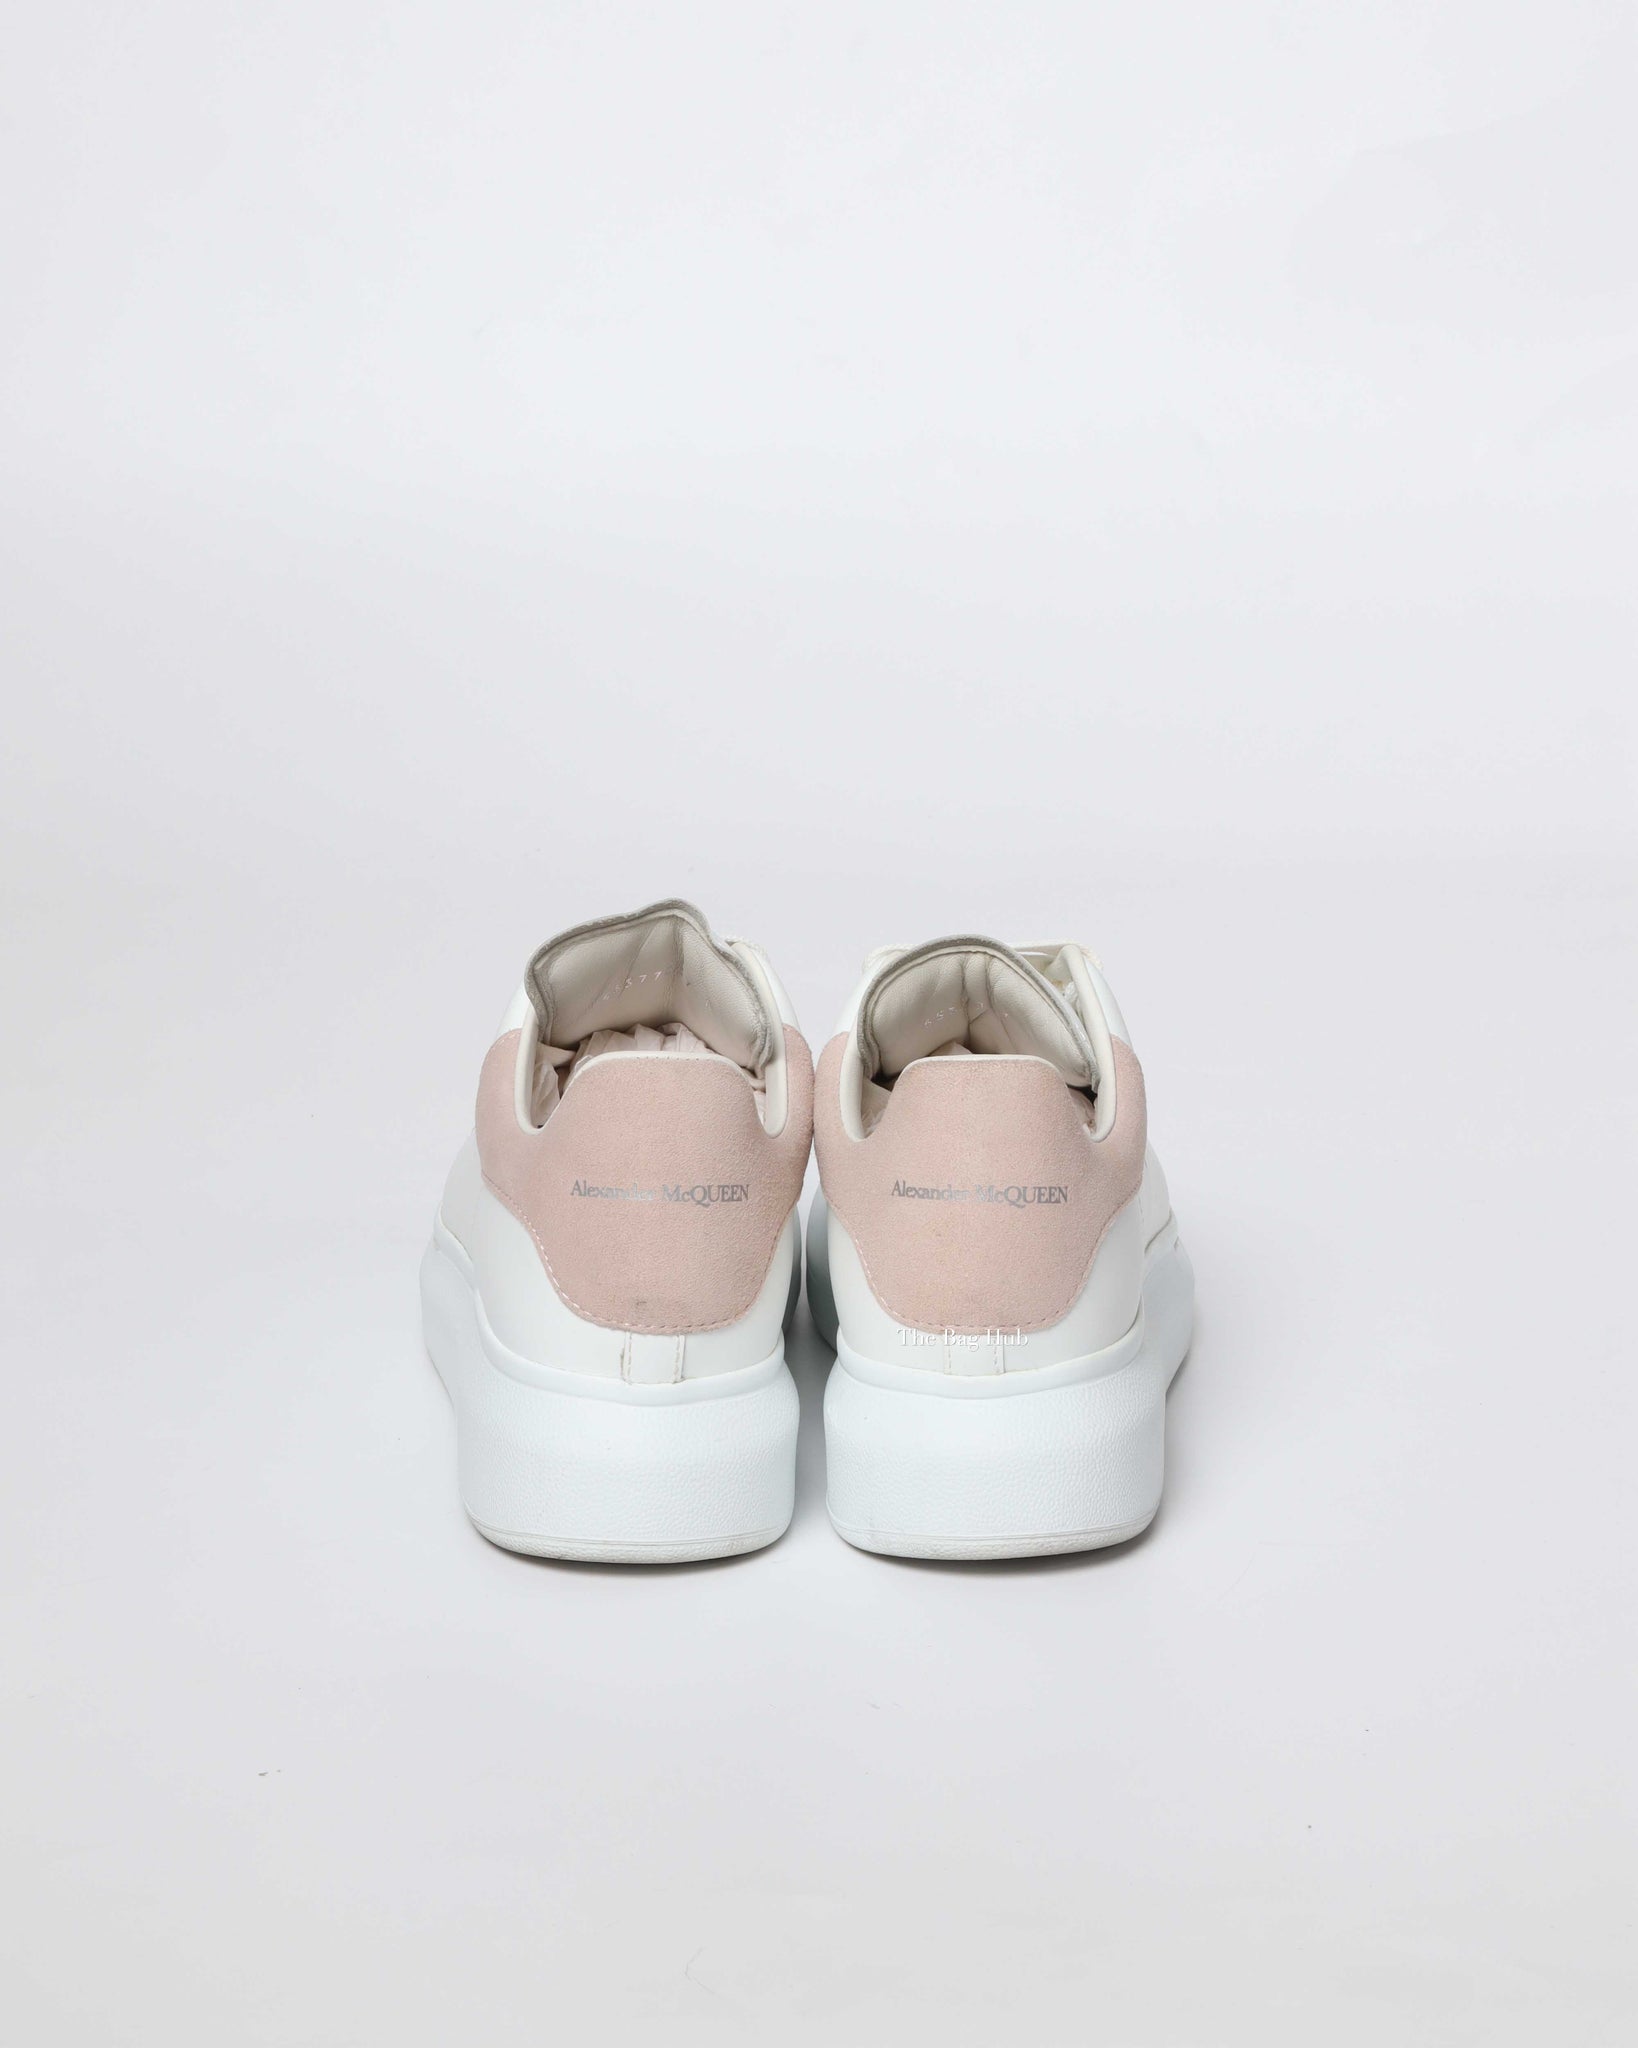 Alexander McQueen White & Pink Oversized Sneakers Size 37 - 6